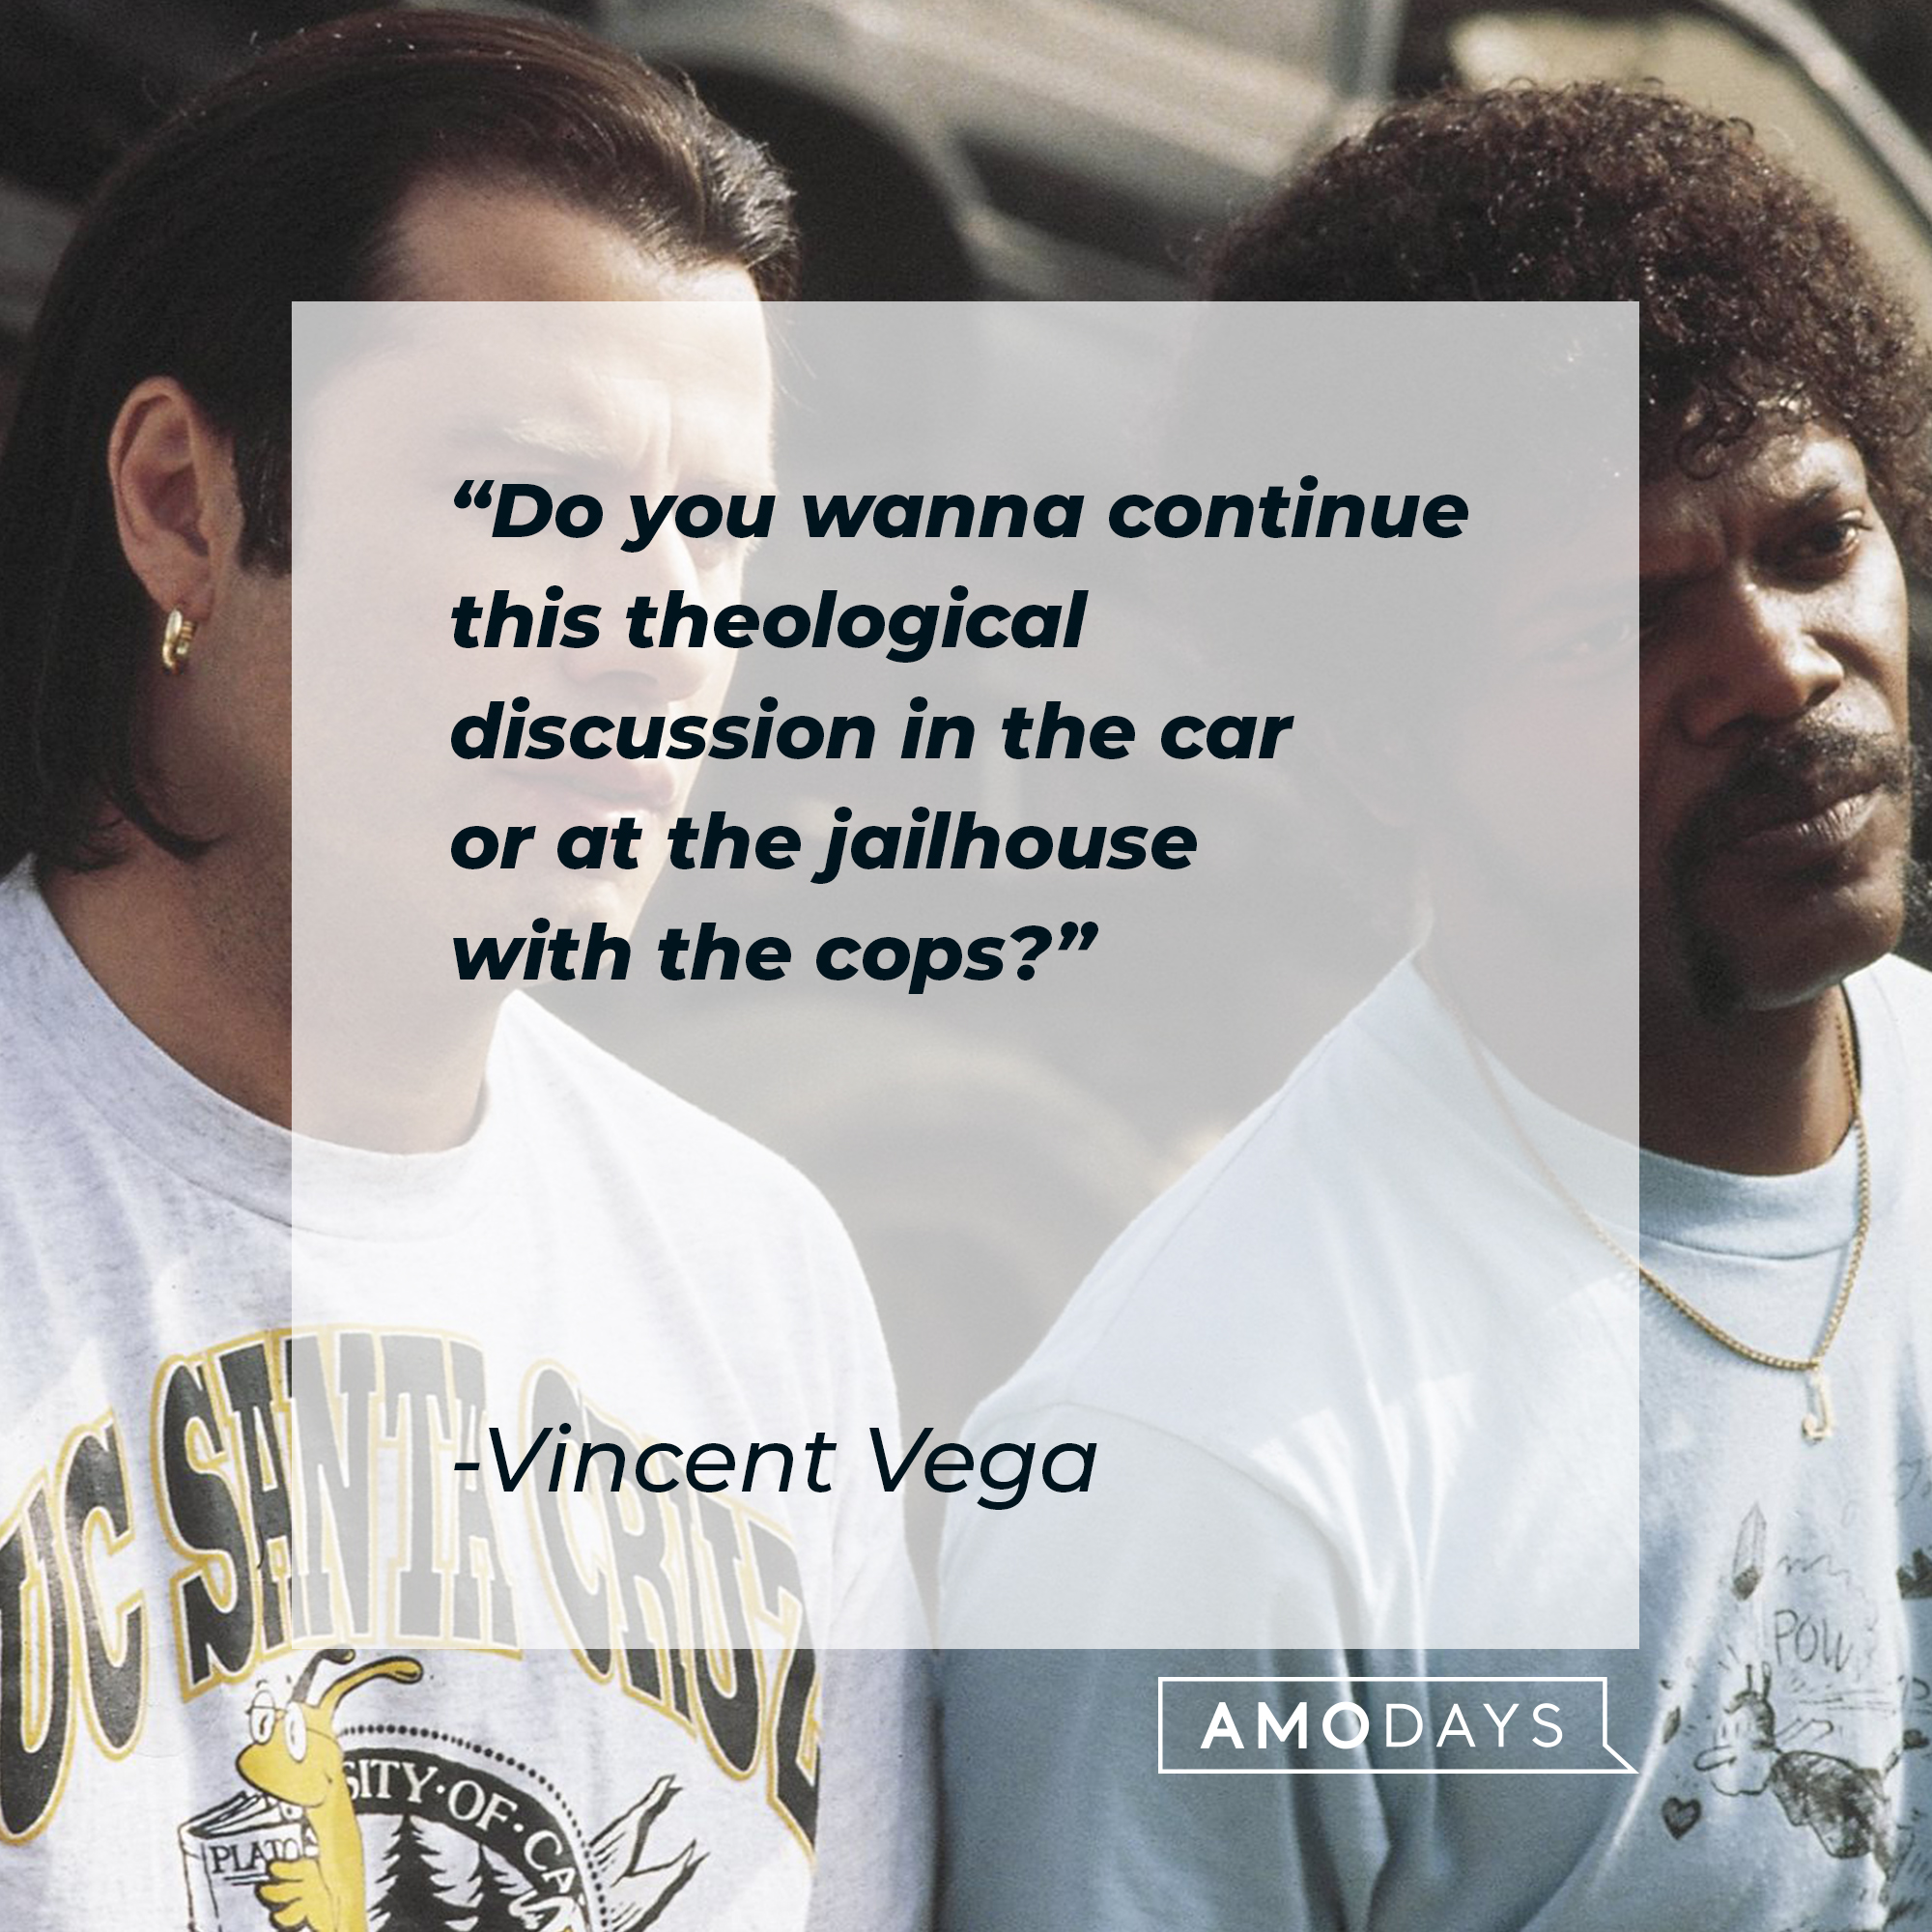 Vincent Vega and Jules Winnfield with Vega’s quote:"Do you wanna continue this theological discussion in the car, or at the jailhouse with the cops?” │Source: facebook.com/PulpFiction